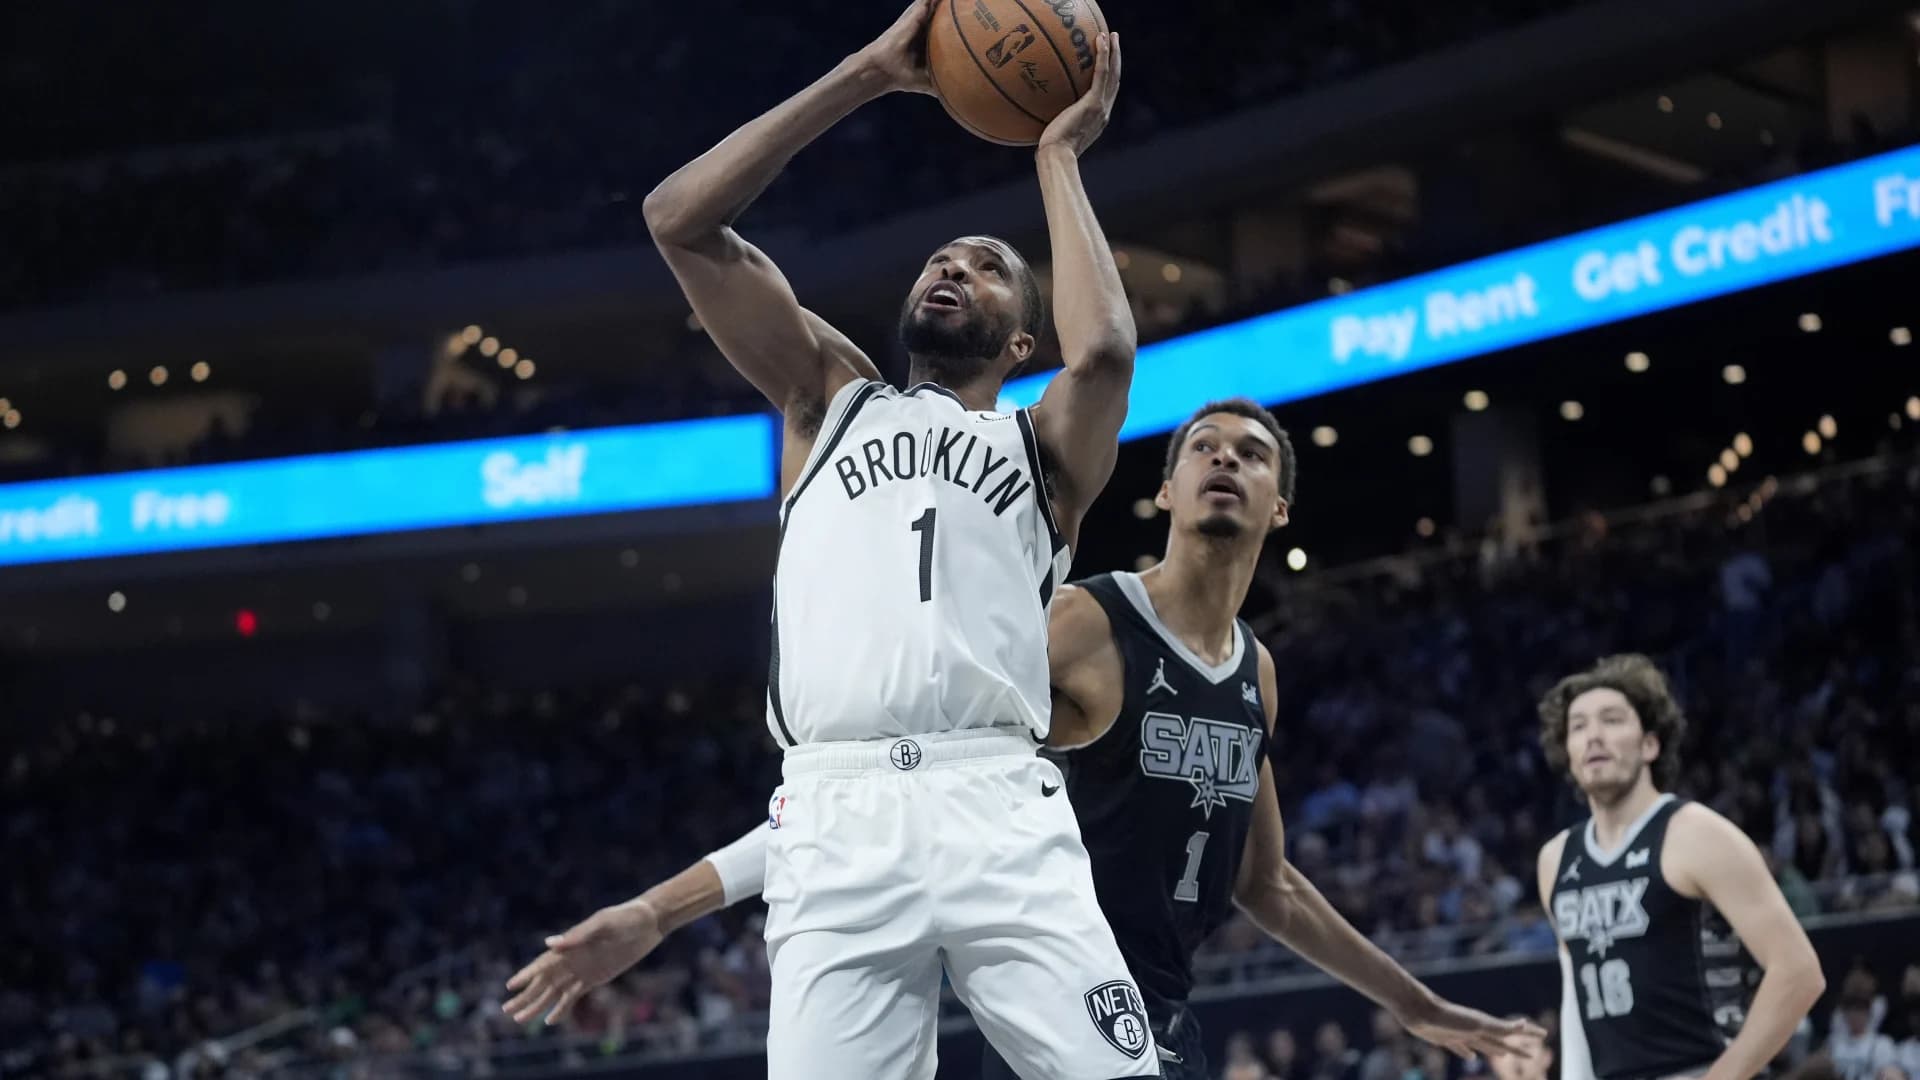 Knicks set to acquire Mikal Bridges in a trade from the Brooklyn Nets, AP sources say